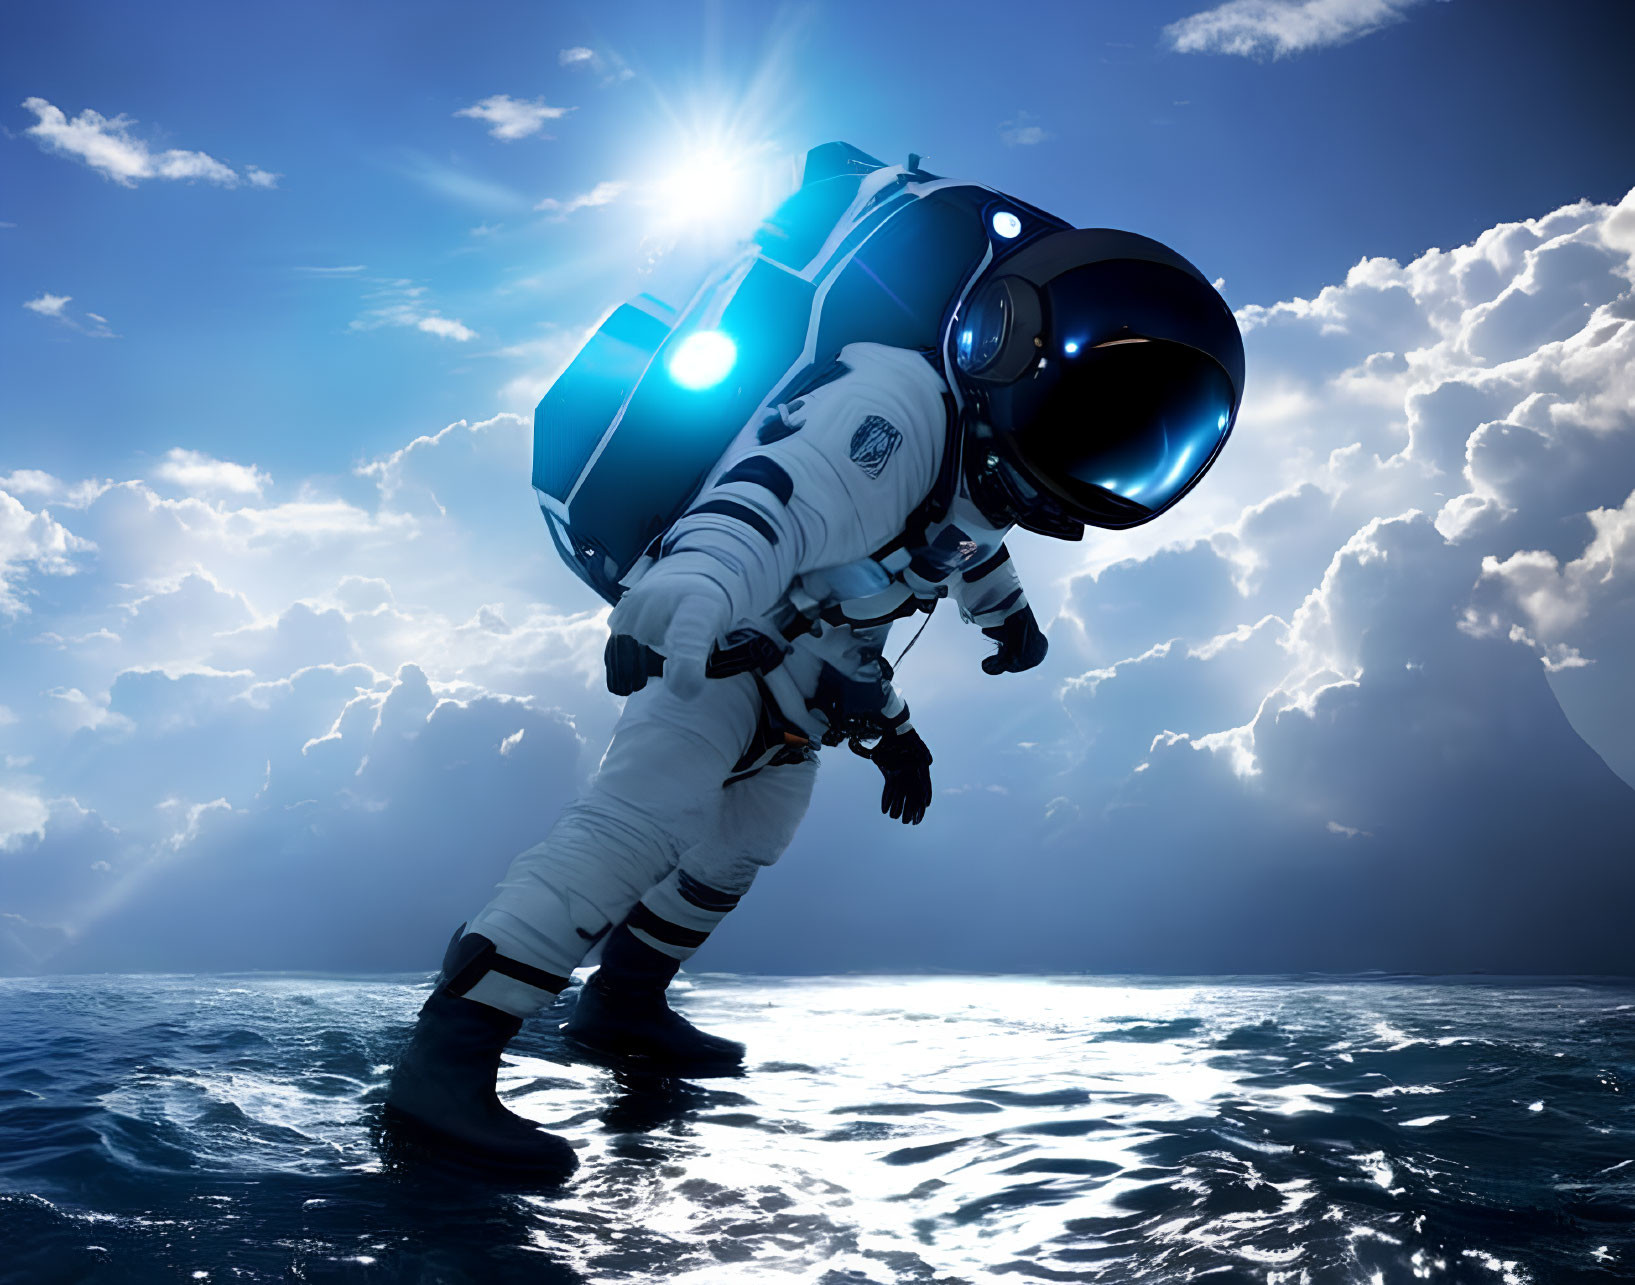 Astronaut in white spacesuit floating above water with sunlight gleaming